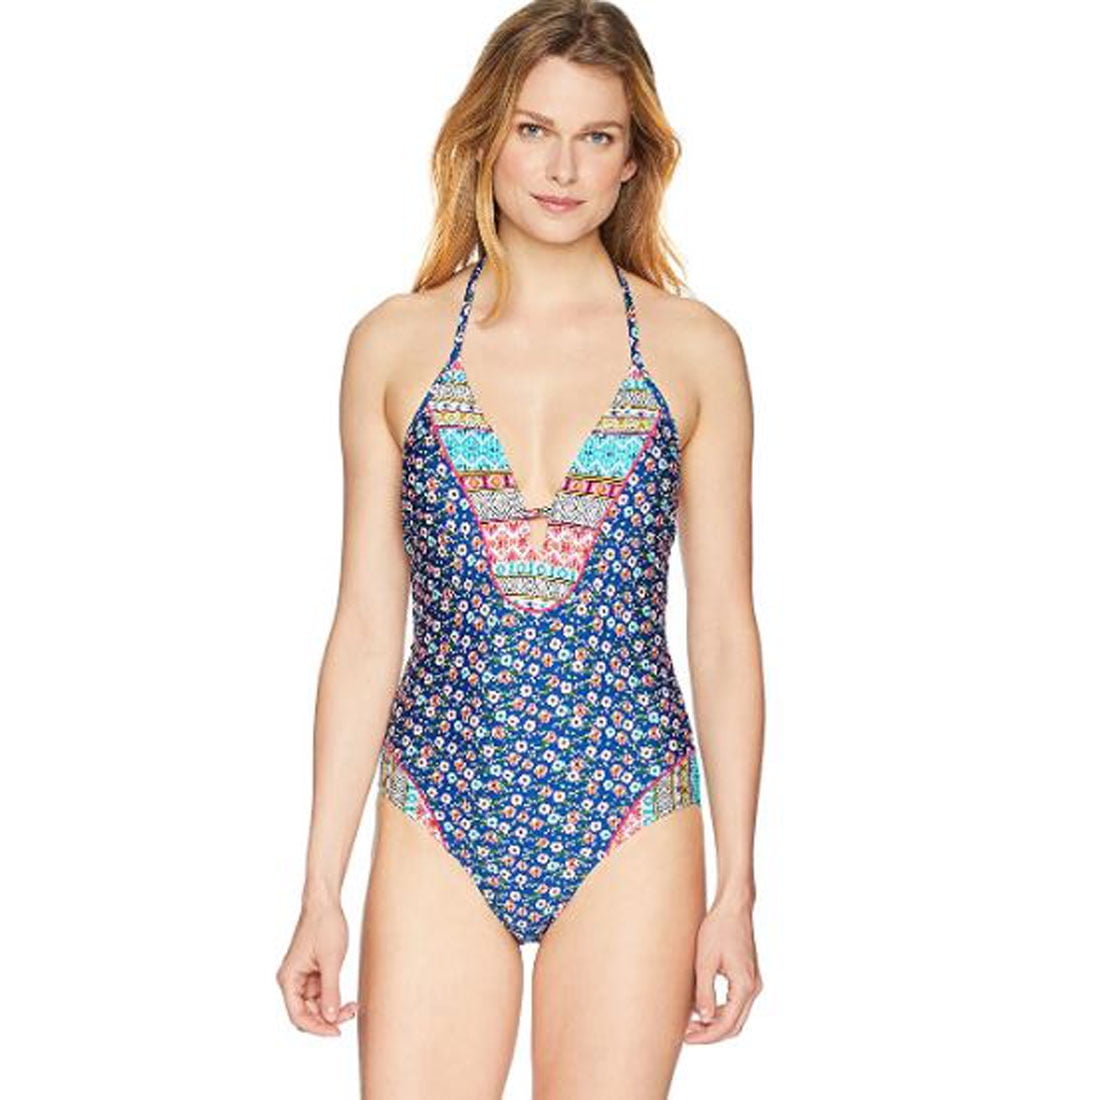 Laundry by Shelli Segal One Piece Swimsuit Plunging Halter Printed Tassel Tie Swimwear Blue Small 